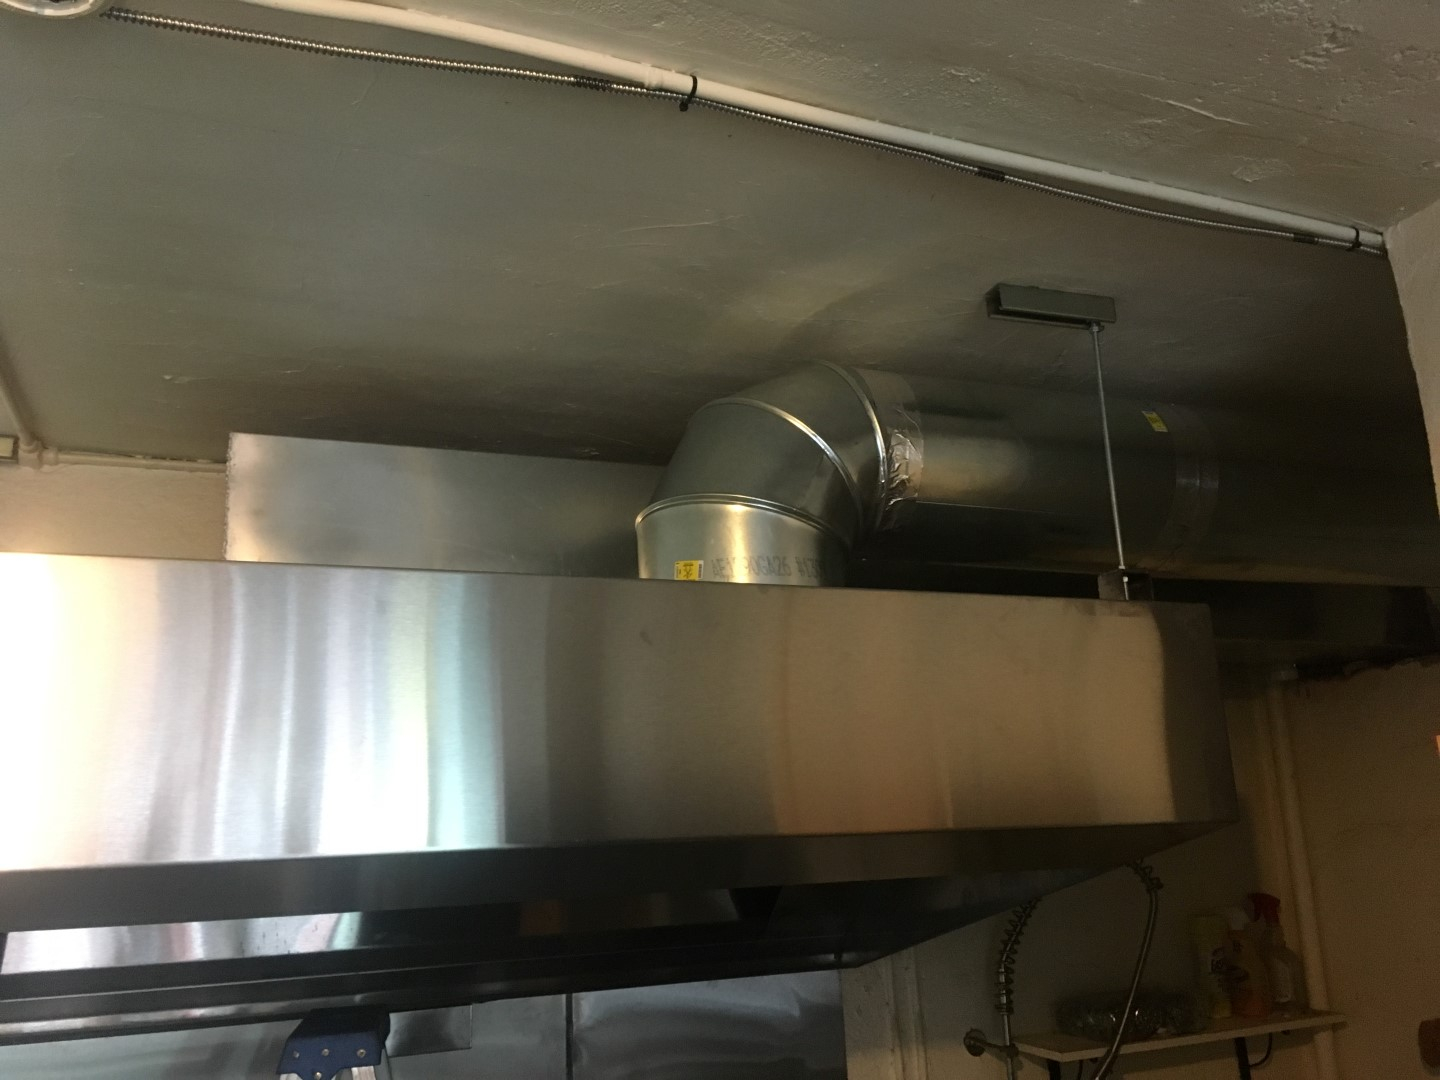 Restaurant Hood Repair And Hood Installations Nj 247 Service intended for proportions 1440 X 1080